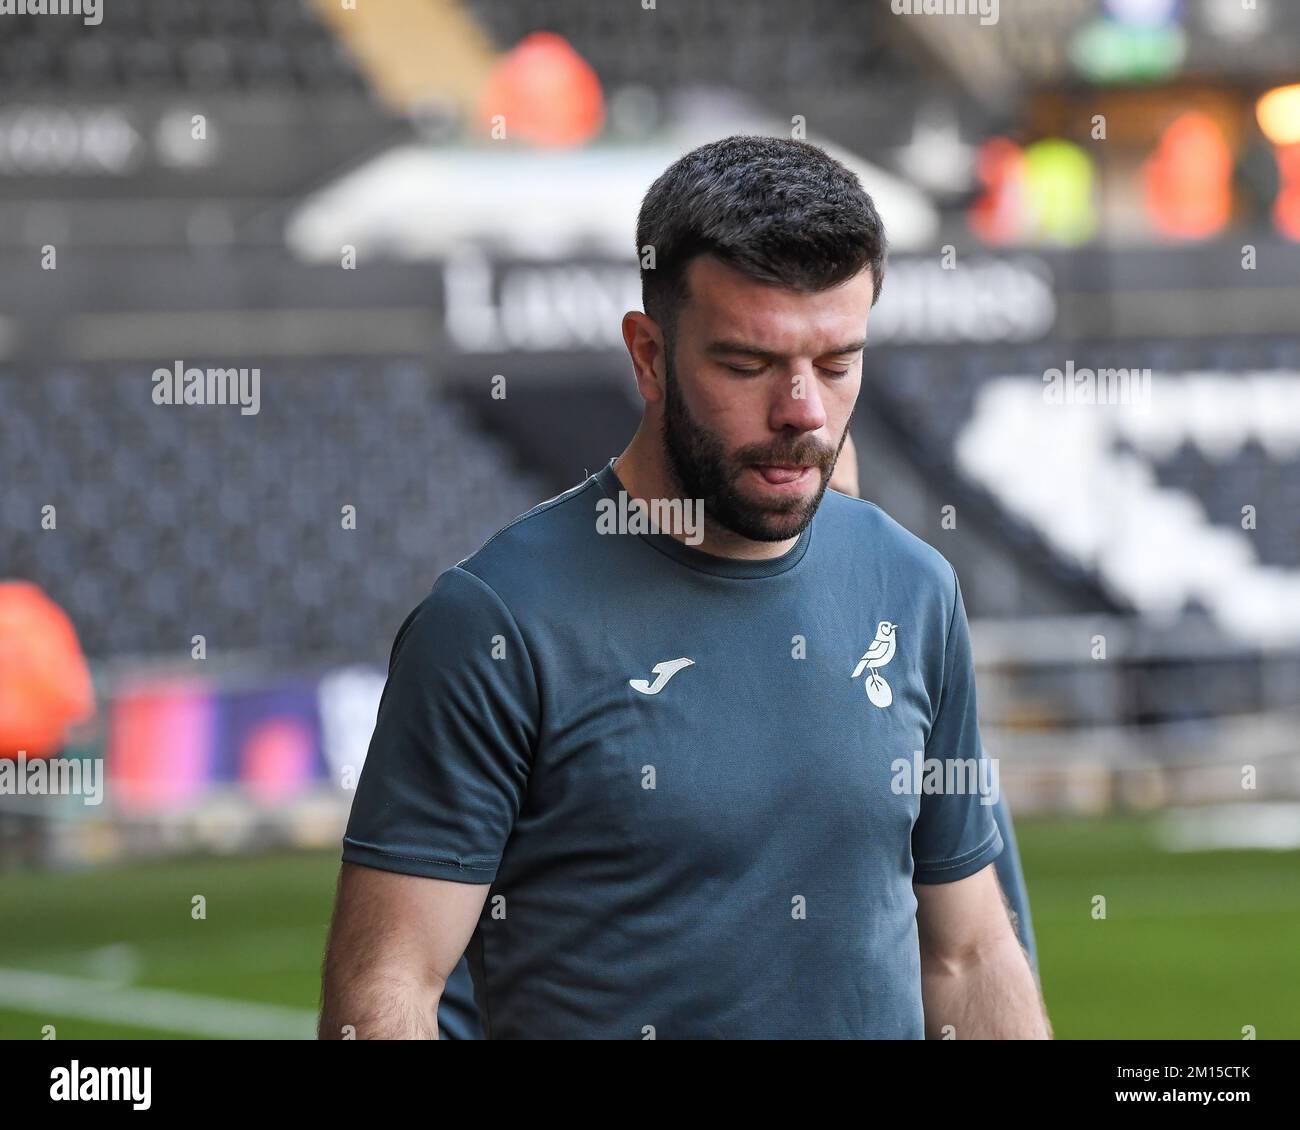 Grant Hanley #5 of Norwich City arrives at Swansea.com stadium during the Sky Bet Championship match Swansea City vs Norwich City at Swansea.com Stadium, Swansea, United Kingdom, 10th December 2022  (Photo by Mike Jones/News Images) Stock Photo